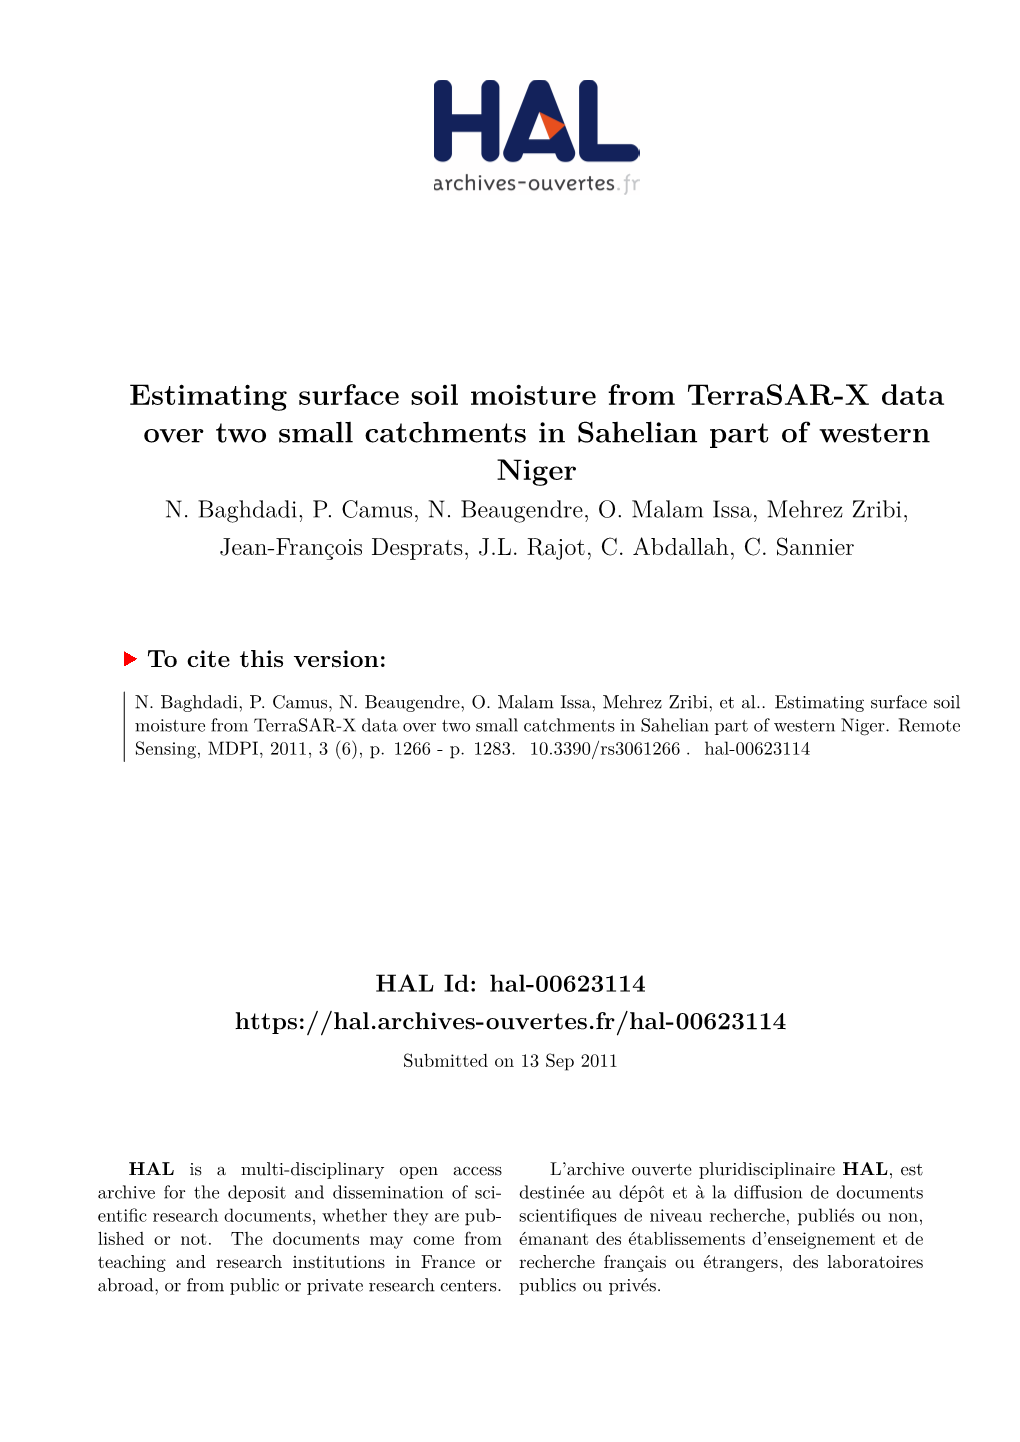 Estimating Surface Soil Moisture from Terrasar-X Data Over Two Small Catchments in Sahelian Part of Western Niger N